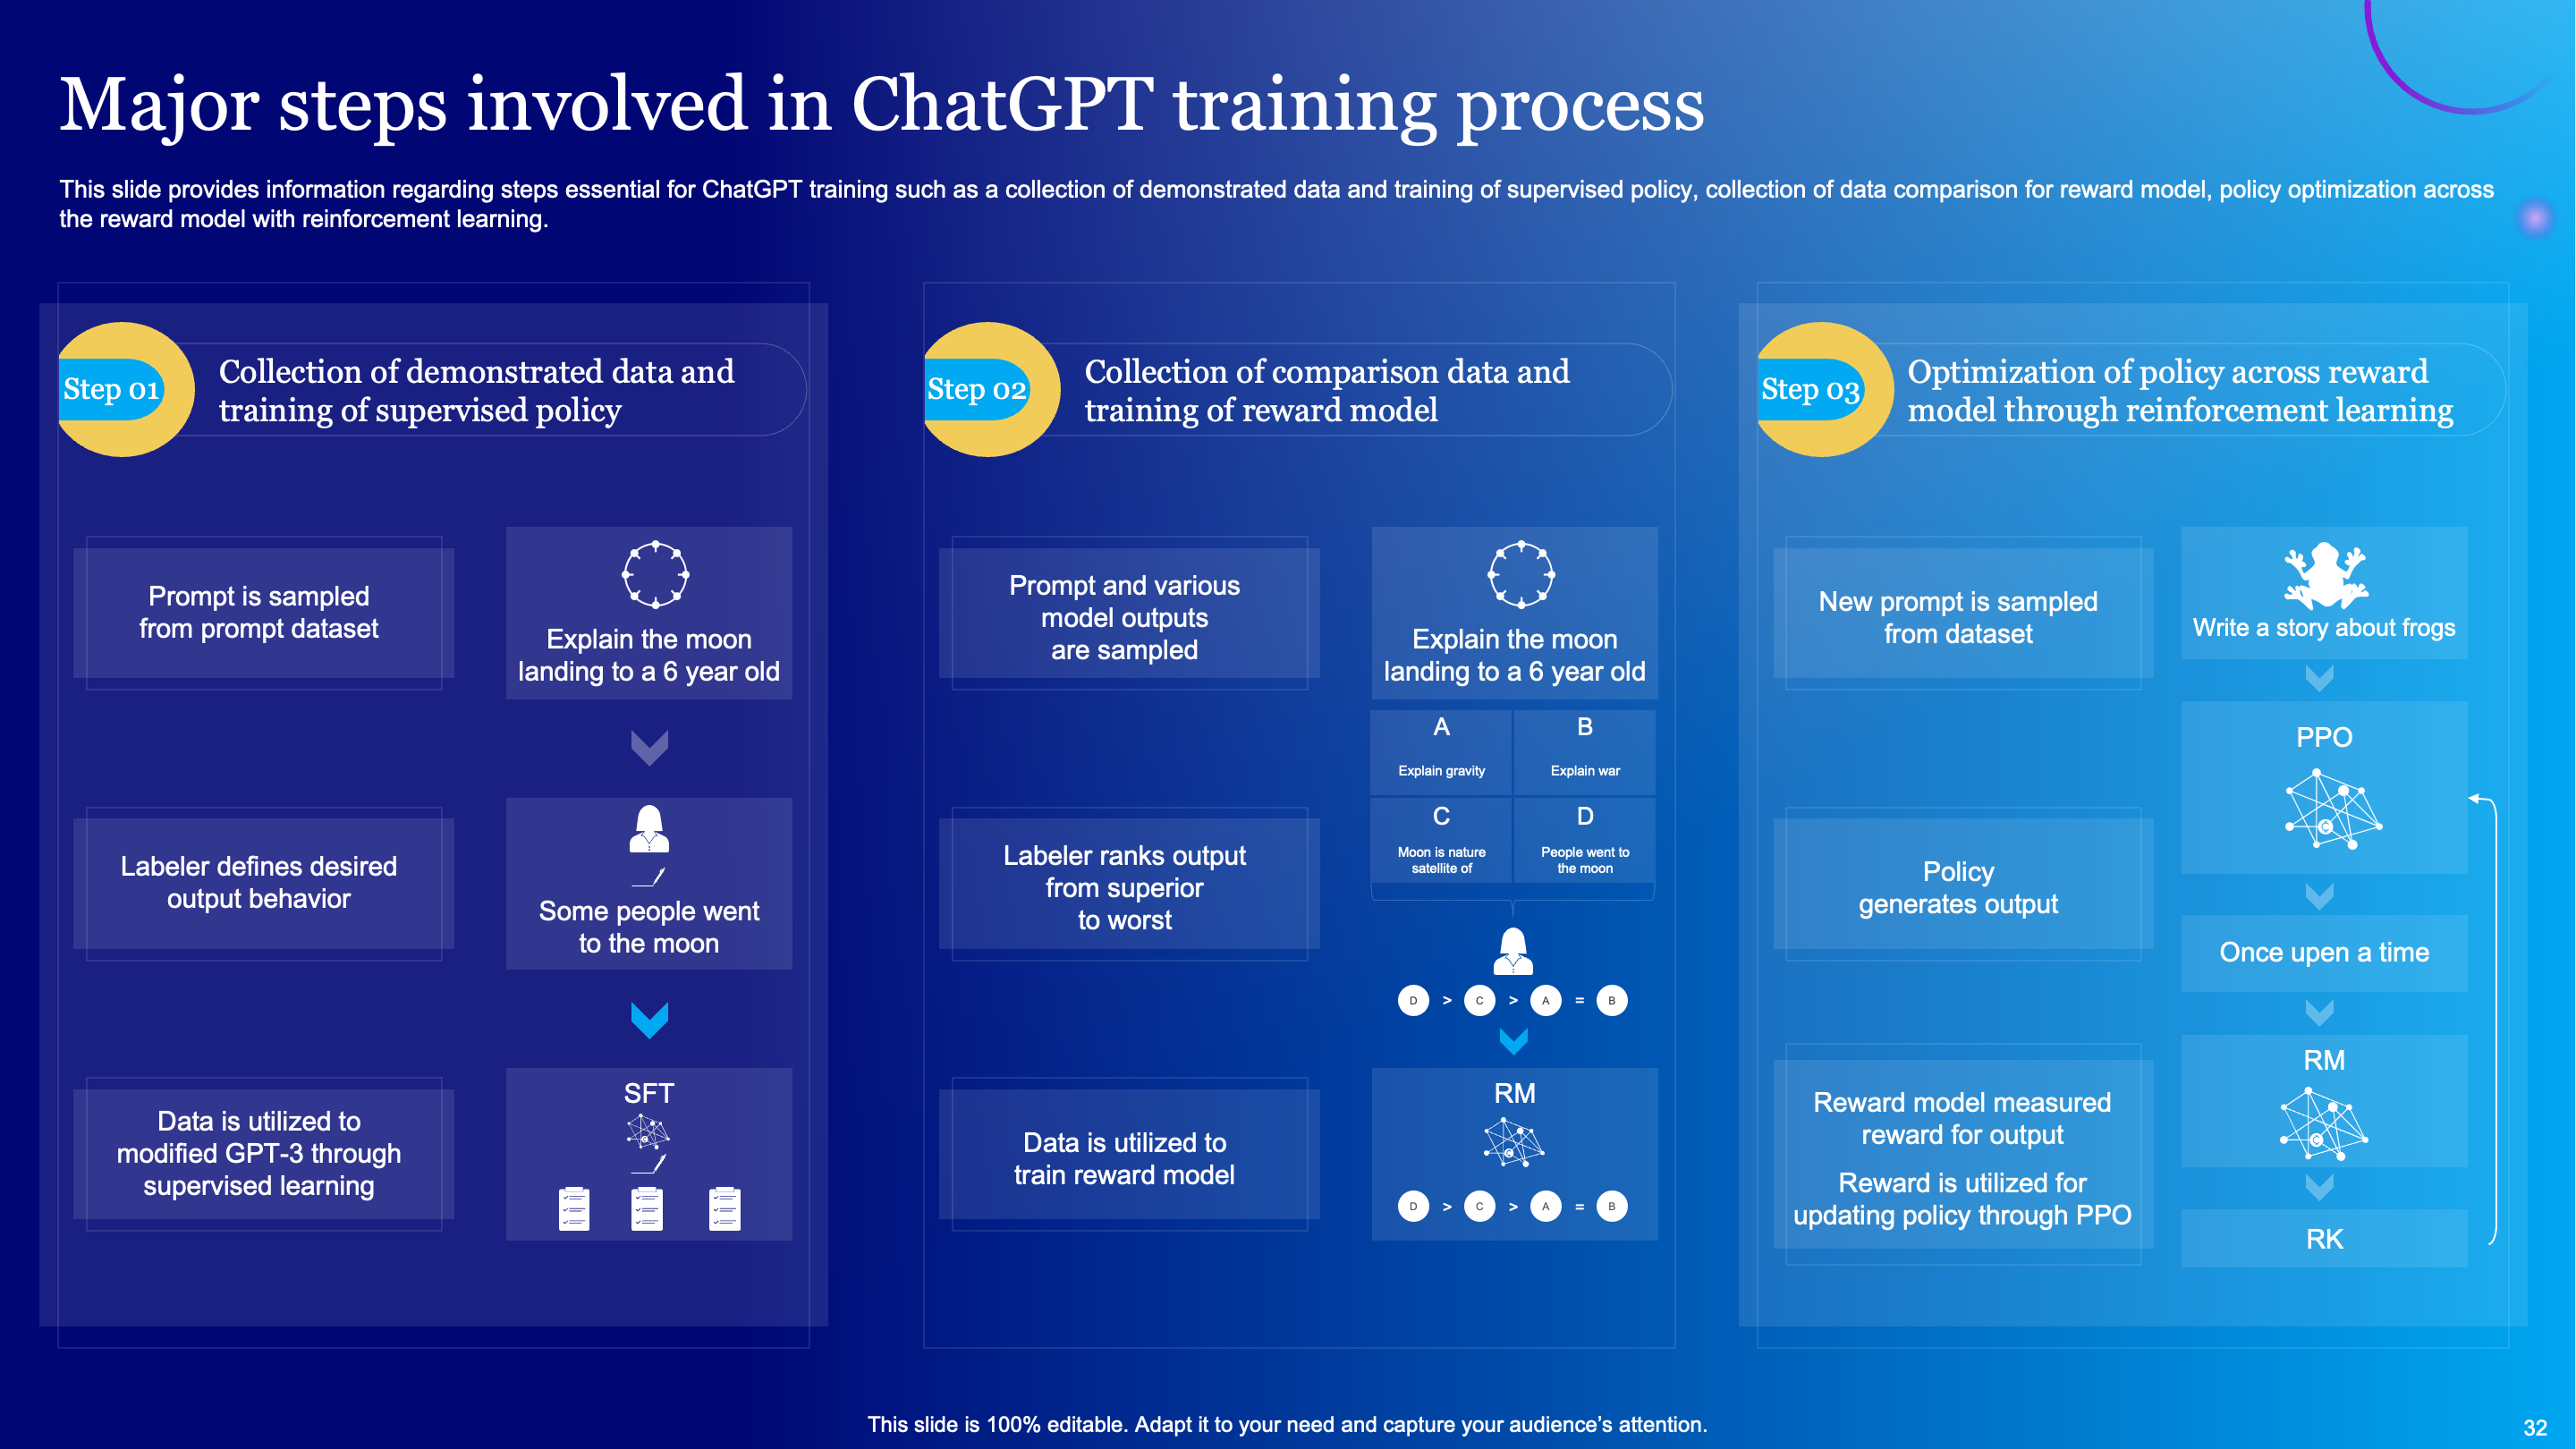 Major Steps Involved in the ChatGPT Training Process